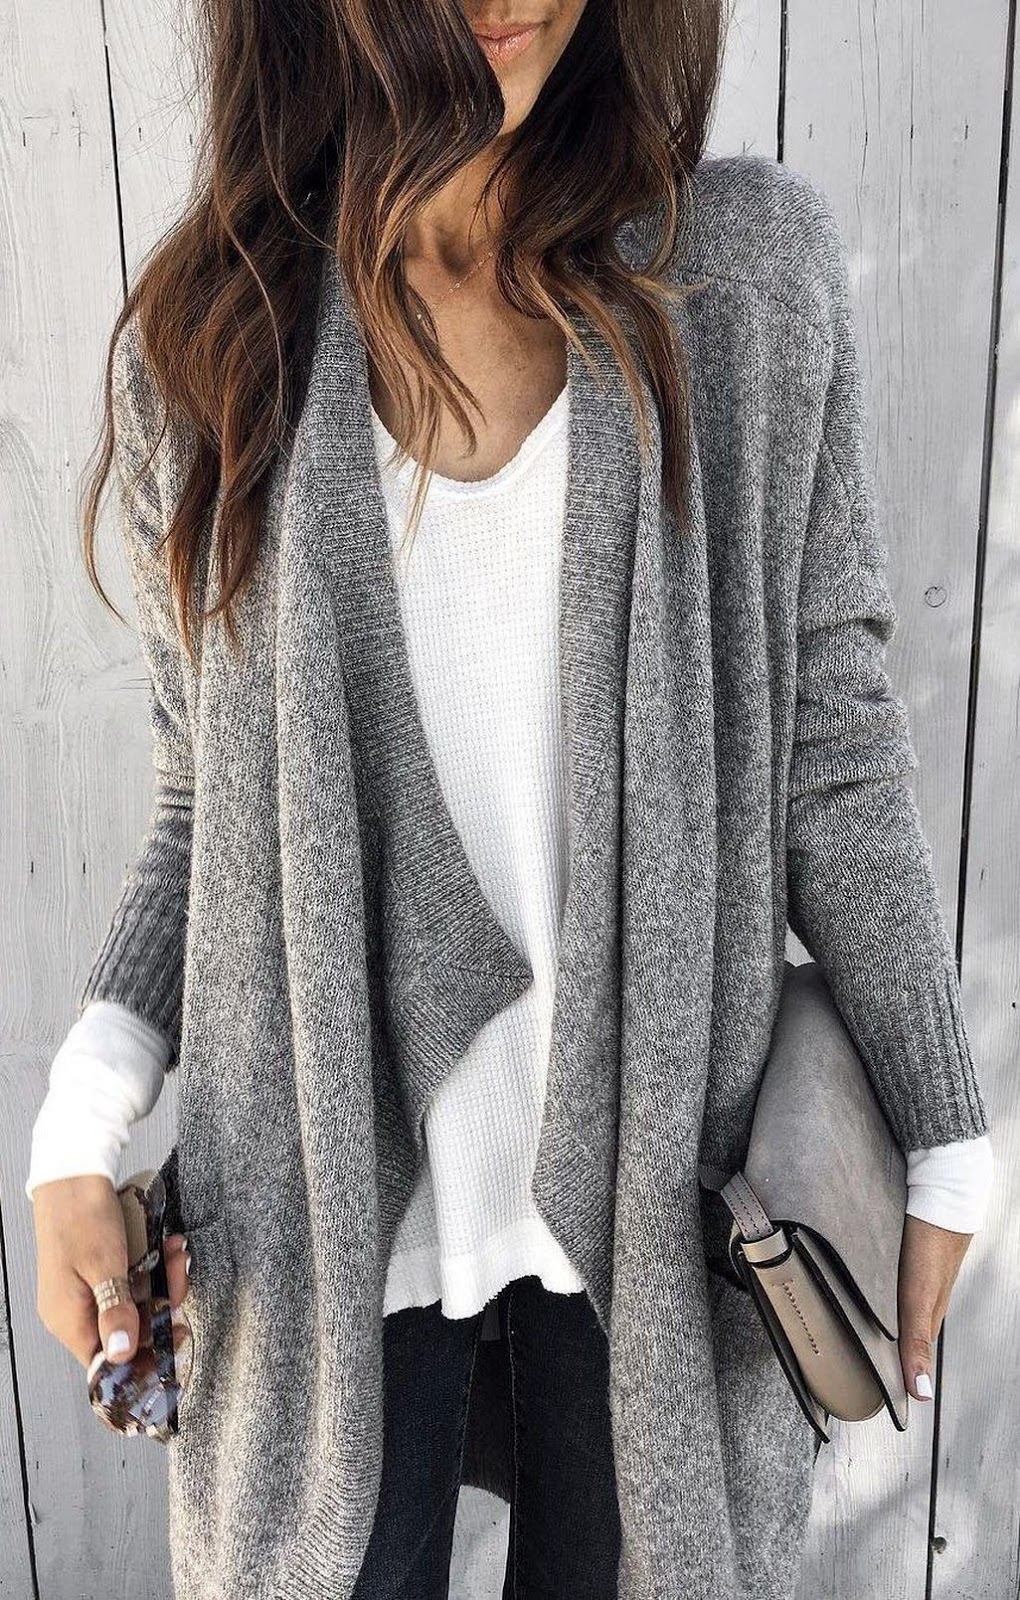 comfy look / knit cardigan + white sweater + skinny jeans